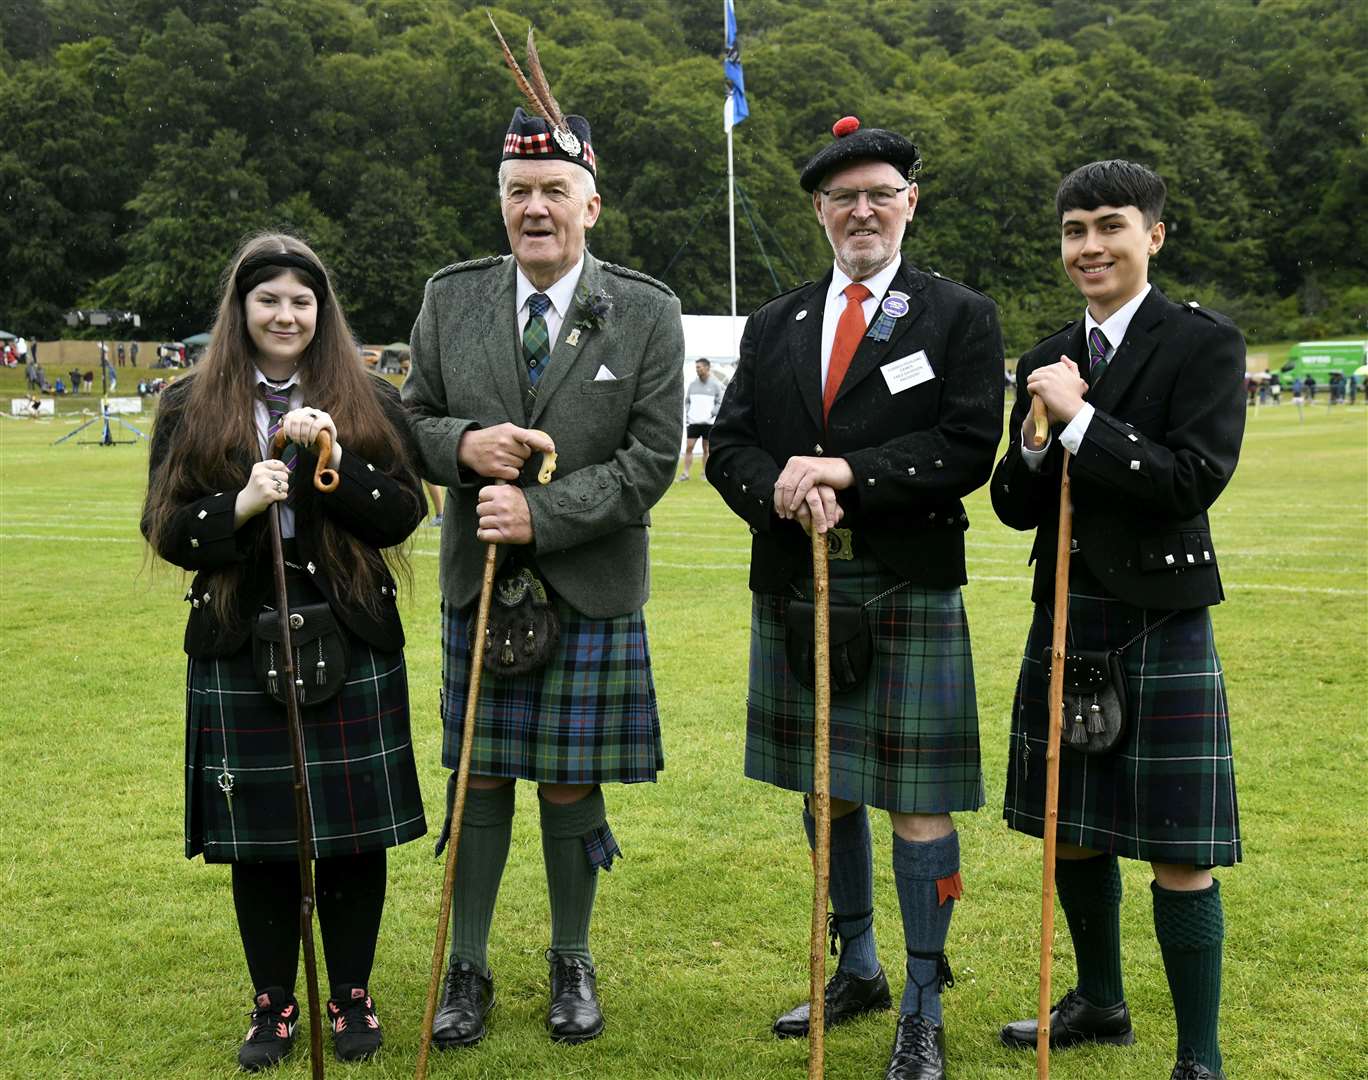 James McPartlin on the far right, junior chieftain, Fred Davidson on the right, The Highland Games President, George Alexander on the left, the Chieftain, Amy McGhee on the far left, another junior chieftain...Forres Highland Games...Picture: Beth Taylor..